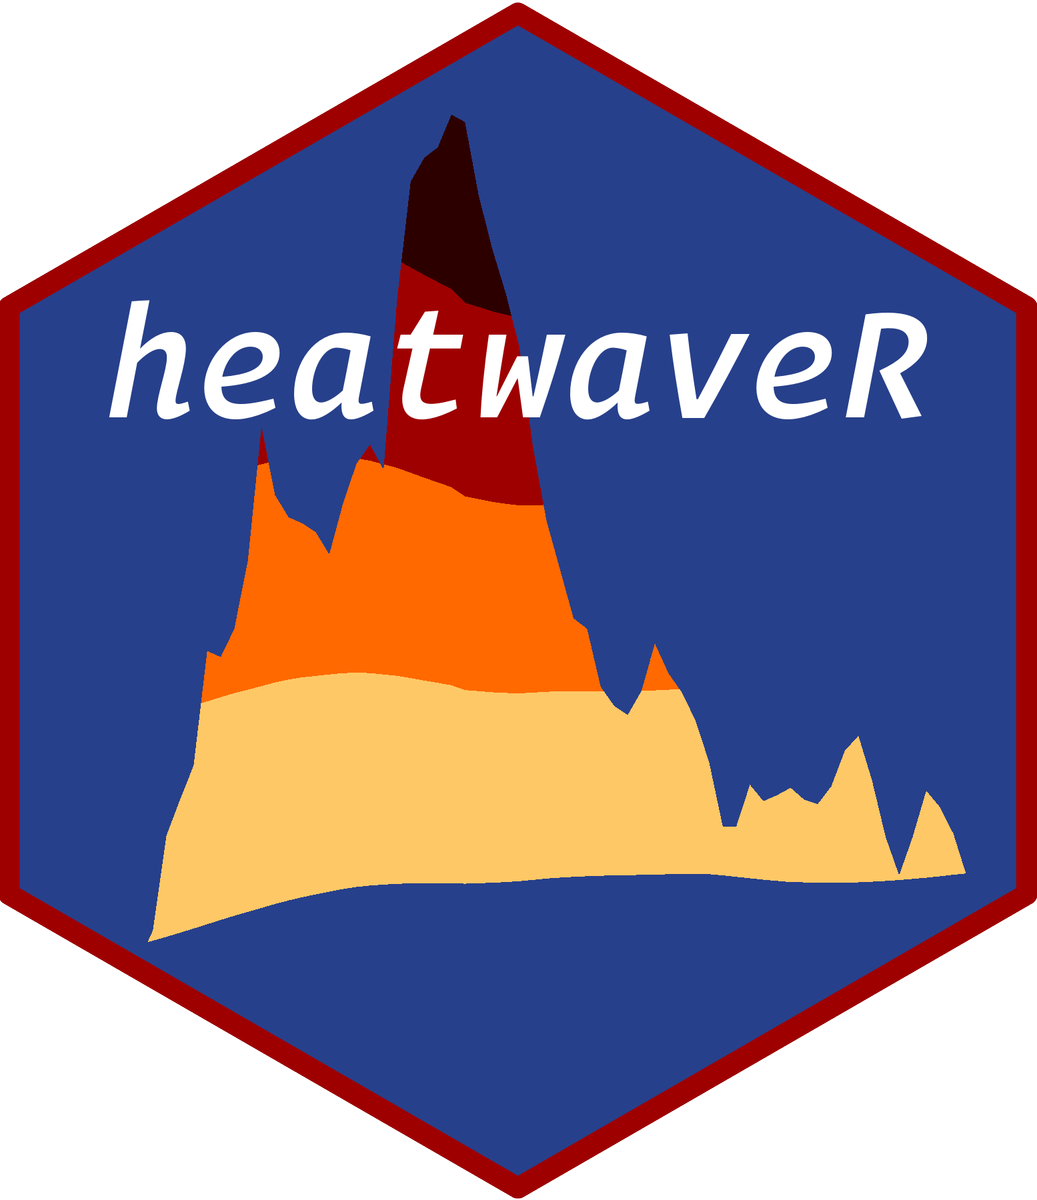 v0.4.4 of heatwaveR has just been released to CRAN! 
This important update keeps the R code used for the detection of #marineheatwaves up to speed with R v4.0.0 and the new large updates to both data.table and dplyr.
cran.r-project.org/web/packages/h…